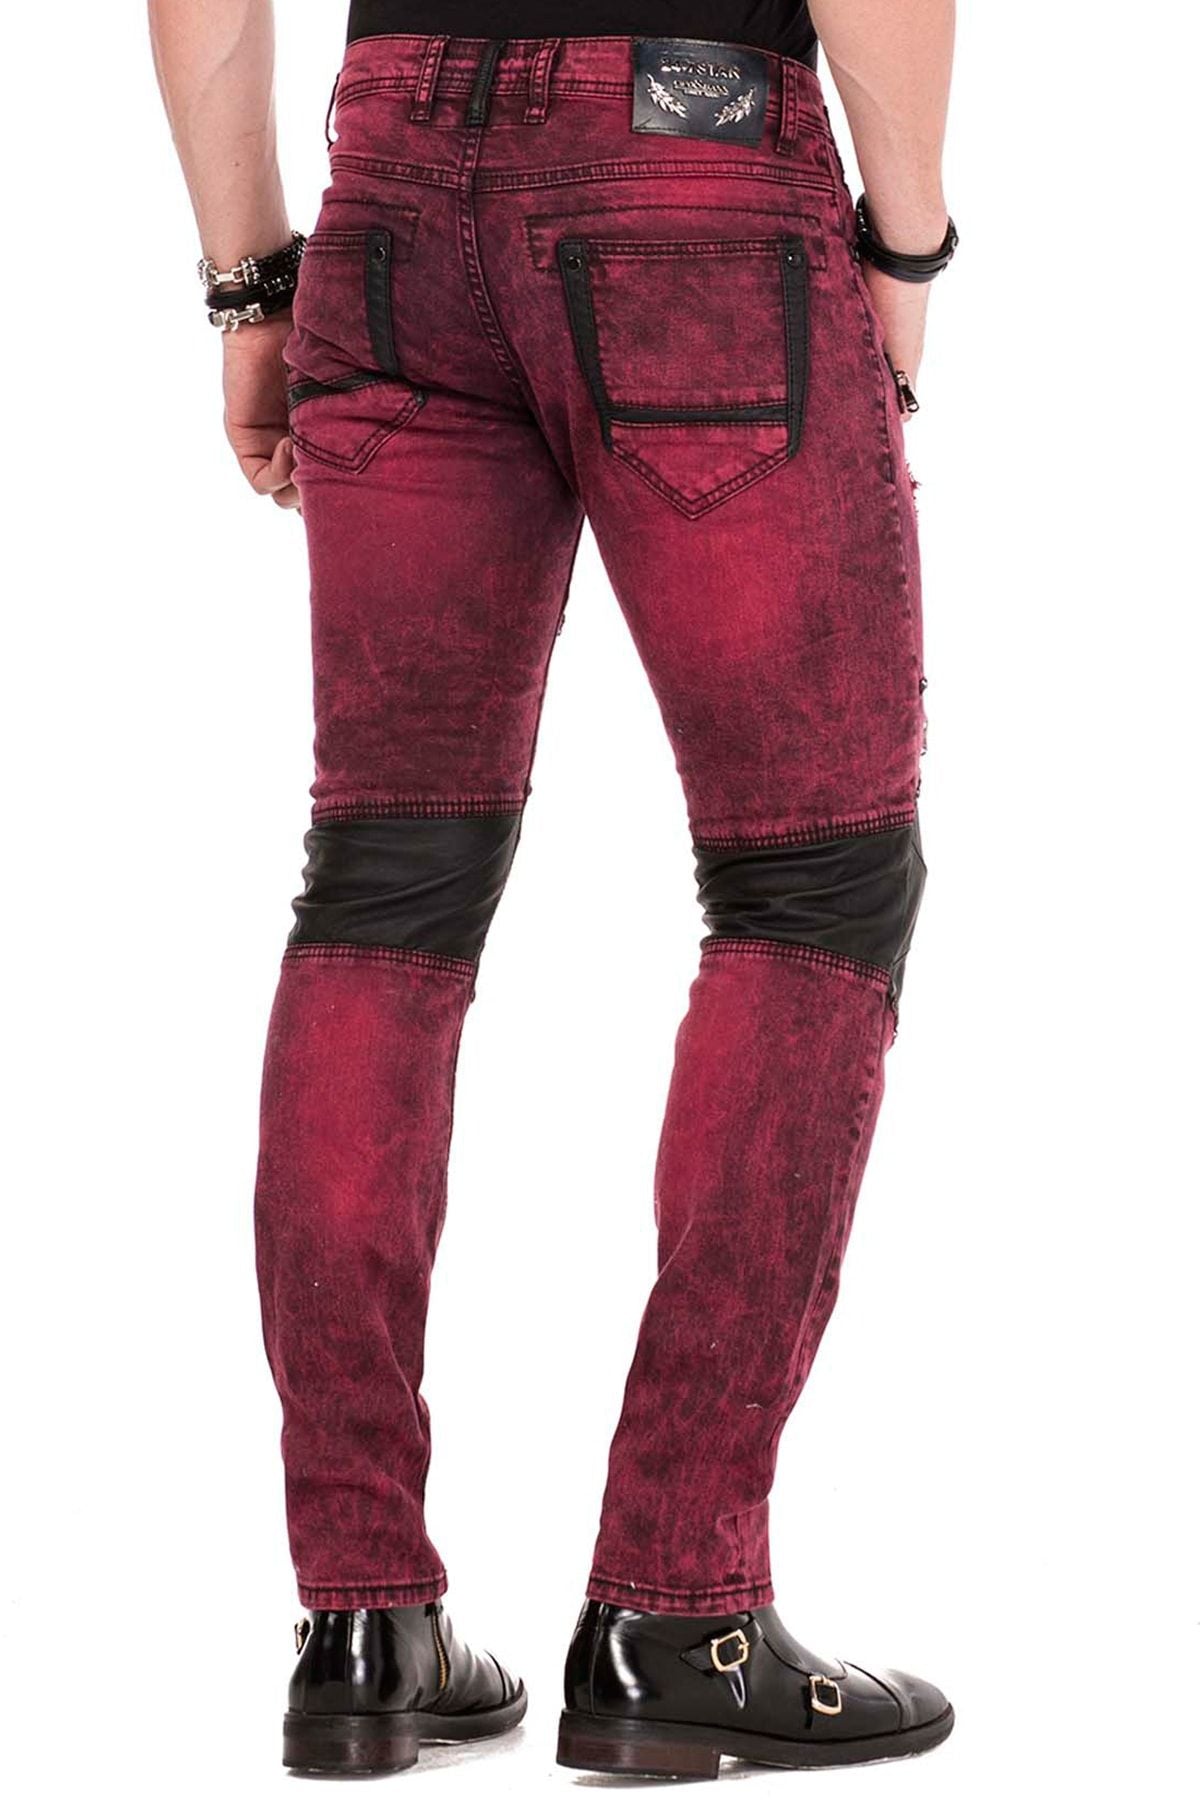 CD481 Men Slim Fit Jeans with rivets and decorative zippers